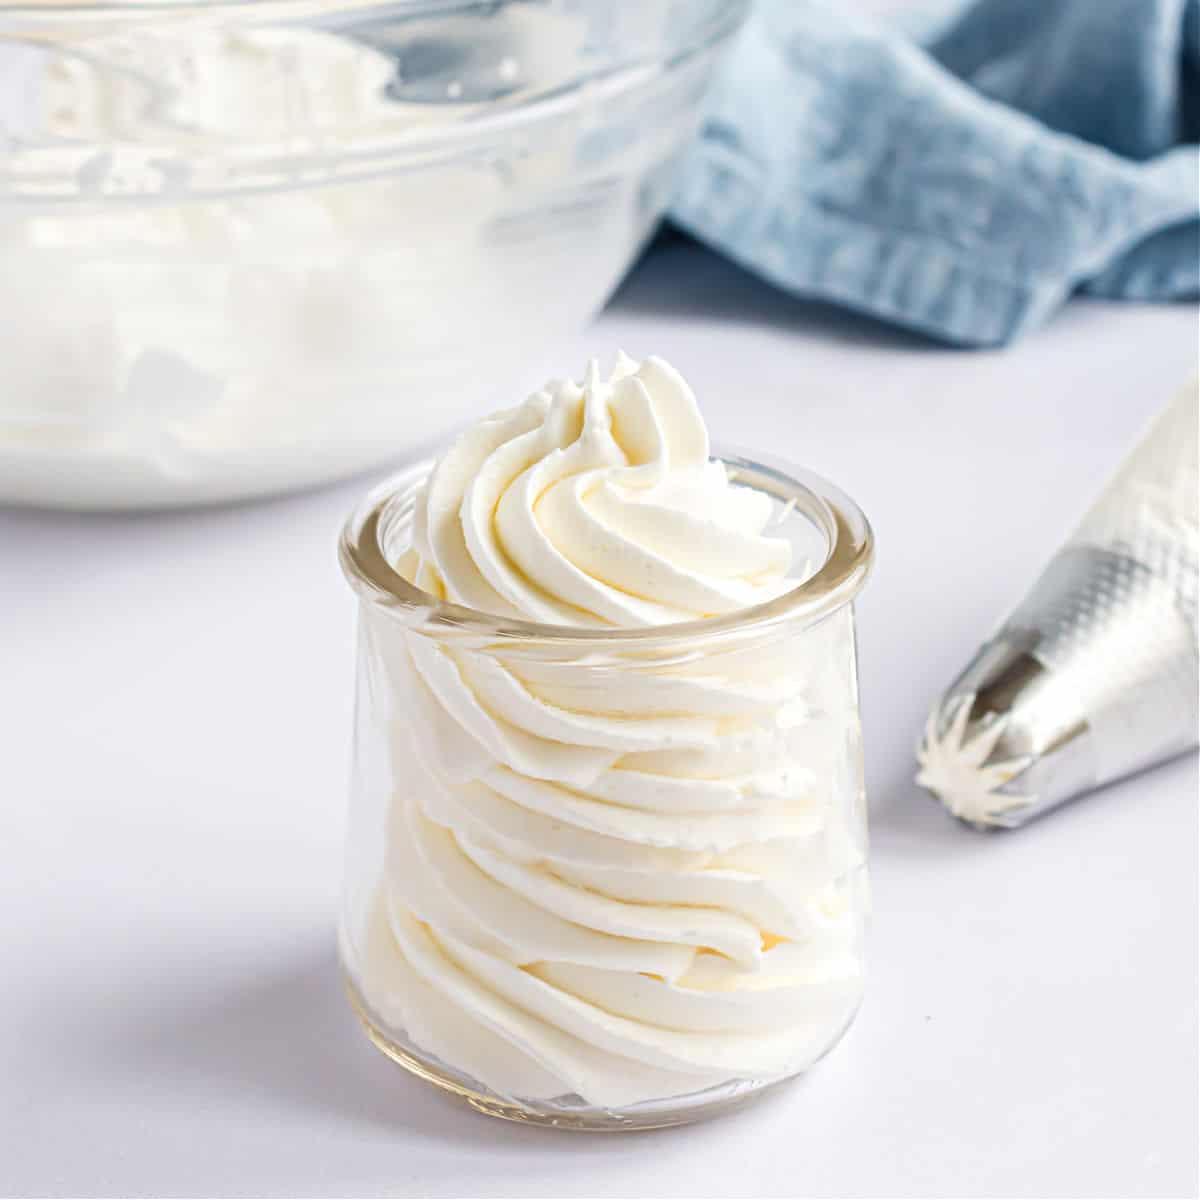 https://www.shugarysweets.com/wp-content/uploads/2022/05/how-to-stabilize-whipped-cream-recipe.jpg